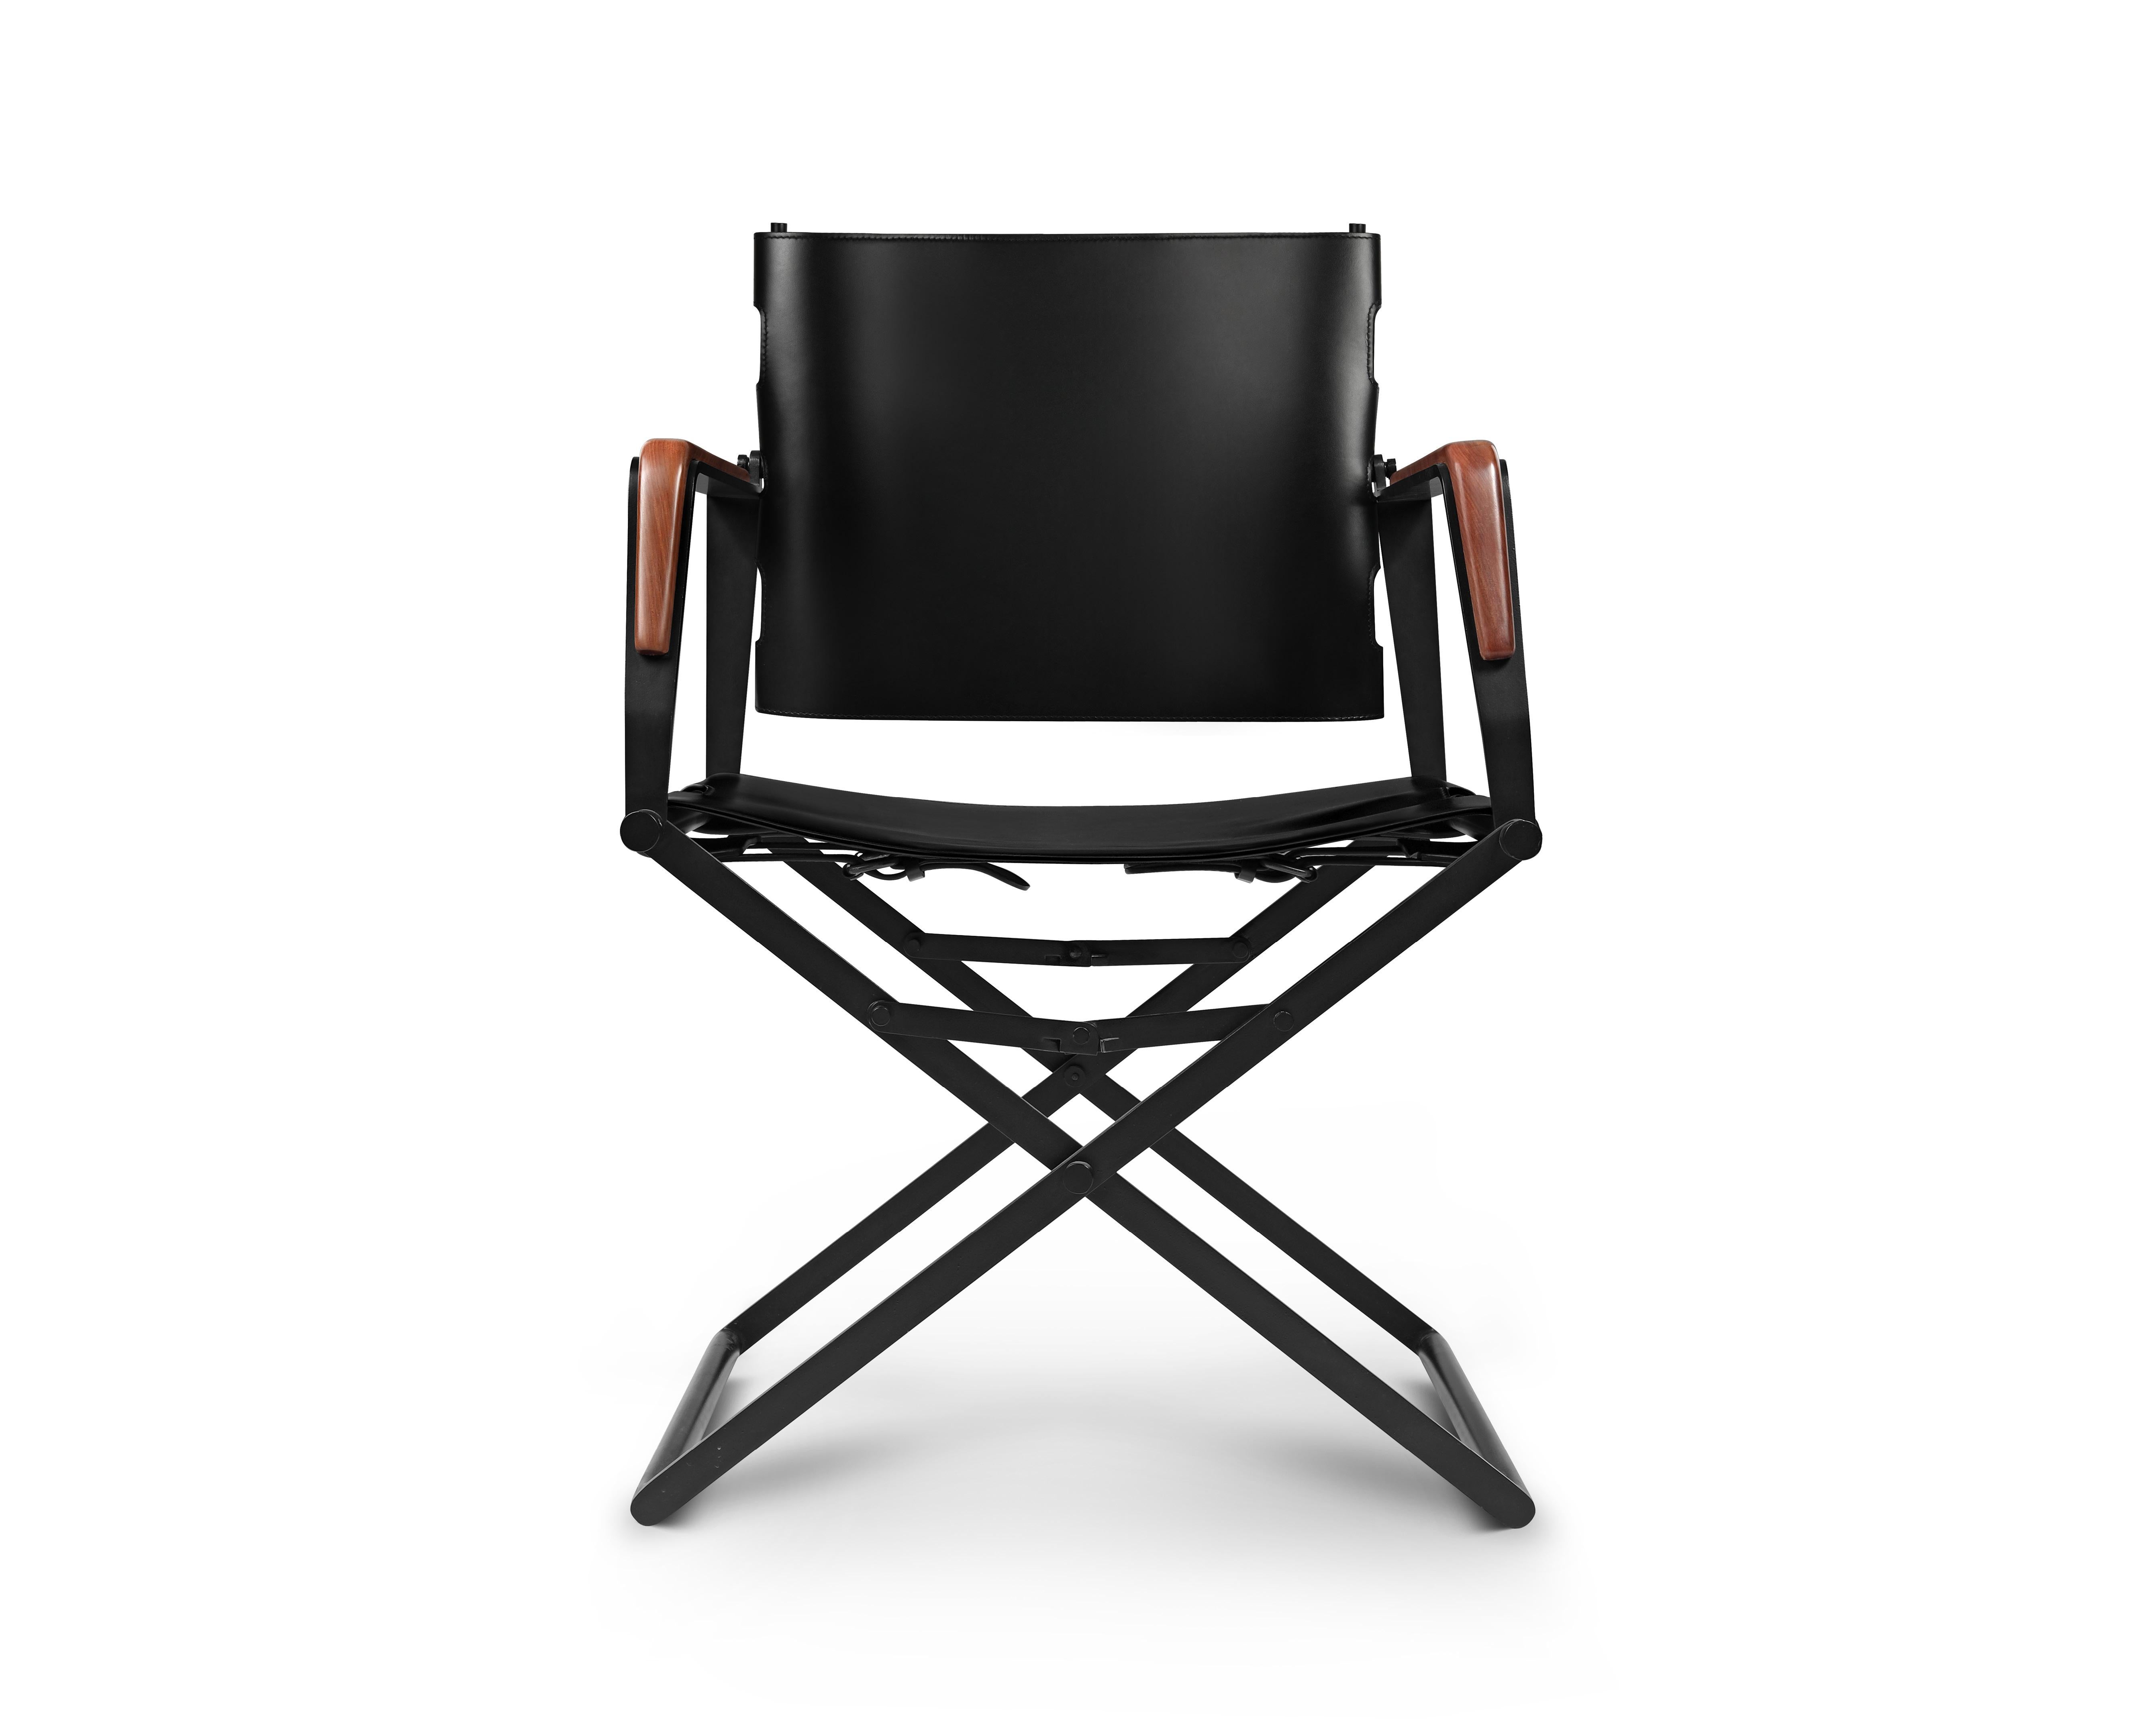 Retta armchair with leather and wood by Madheke
Dimensions: W 58.7 x D 56.2 x H 89.5 cm
Materials: leather, wood, metal

The RETTA consists of a folding frame paying tribute to the classic American style director's chair from the golden Hollywood